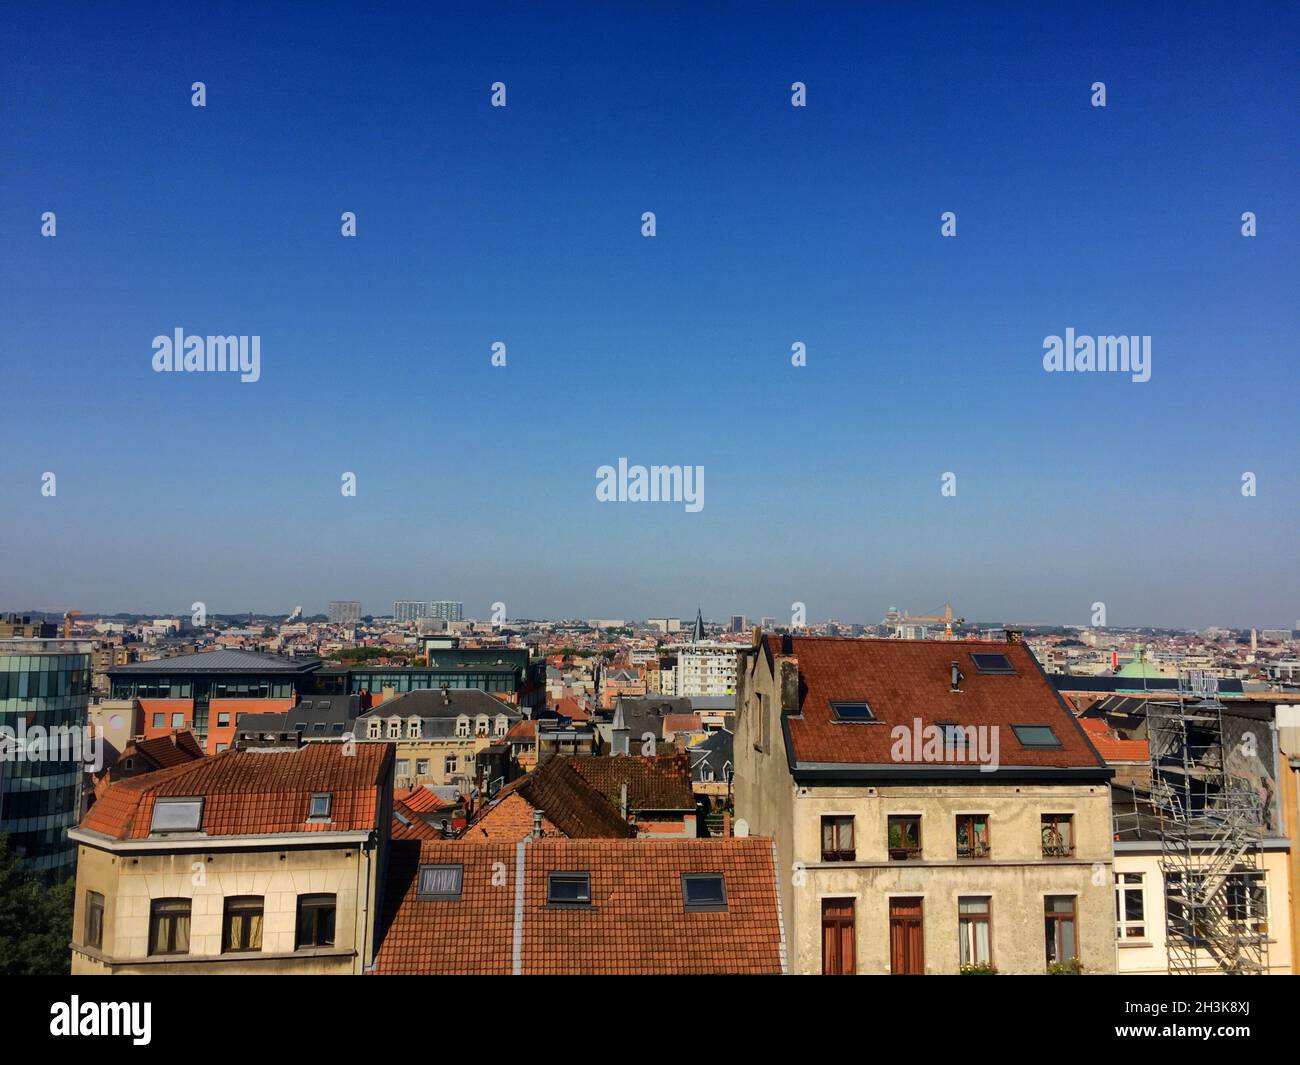 Colorful rooftops in the city under a clear blue sky Stock Photo